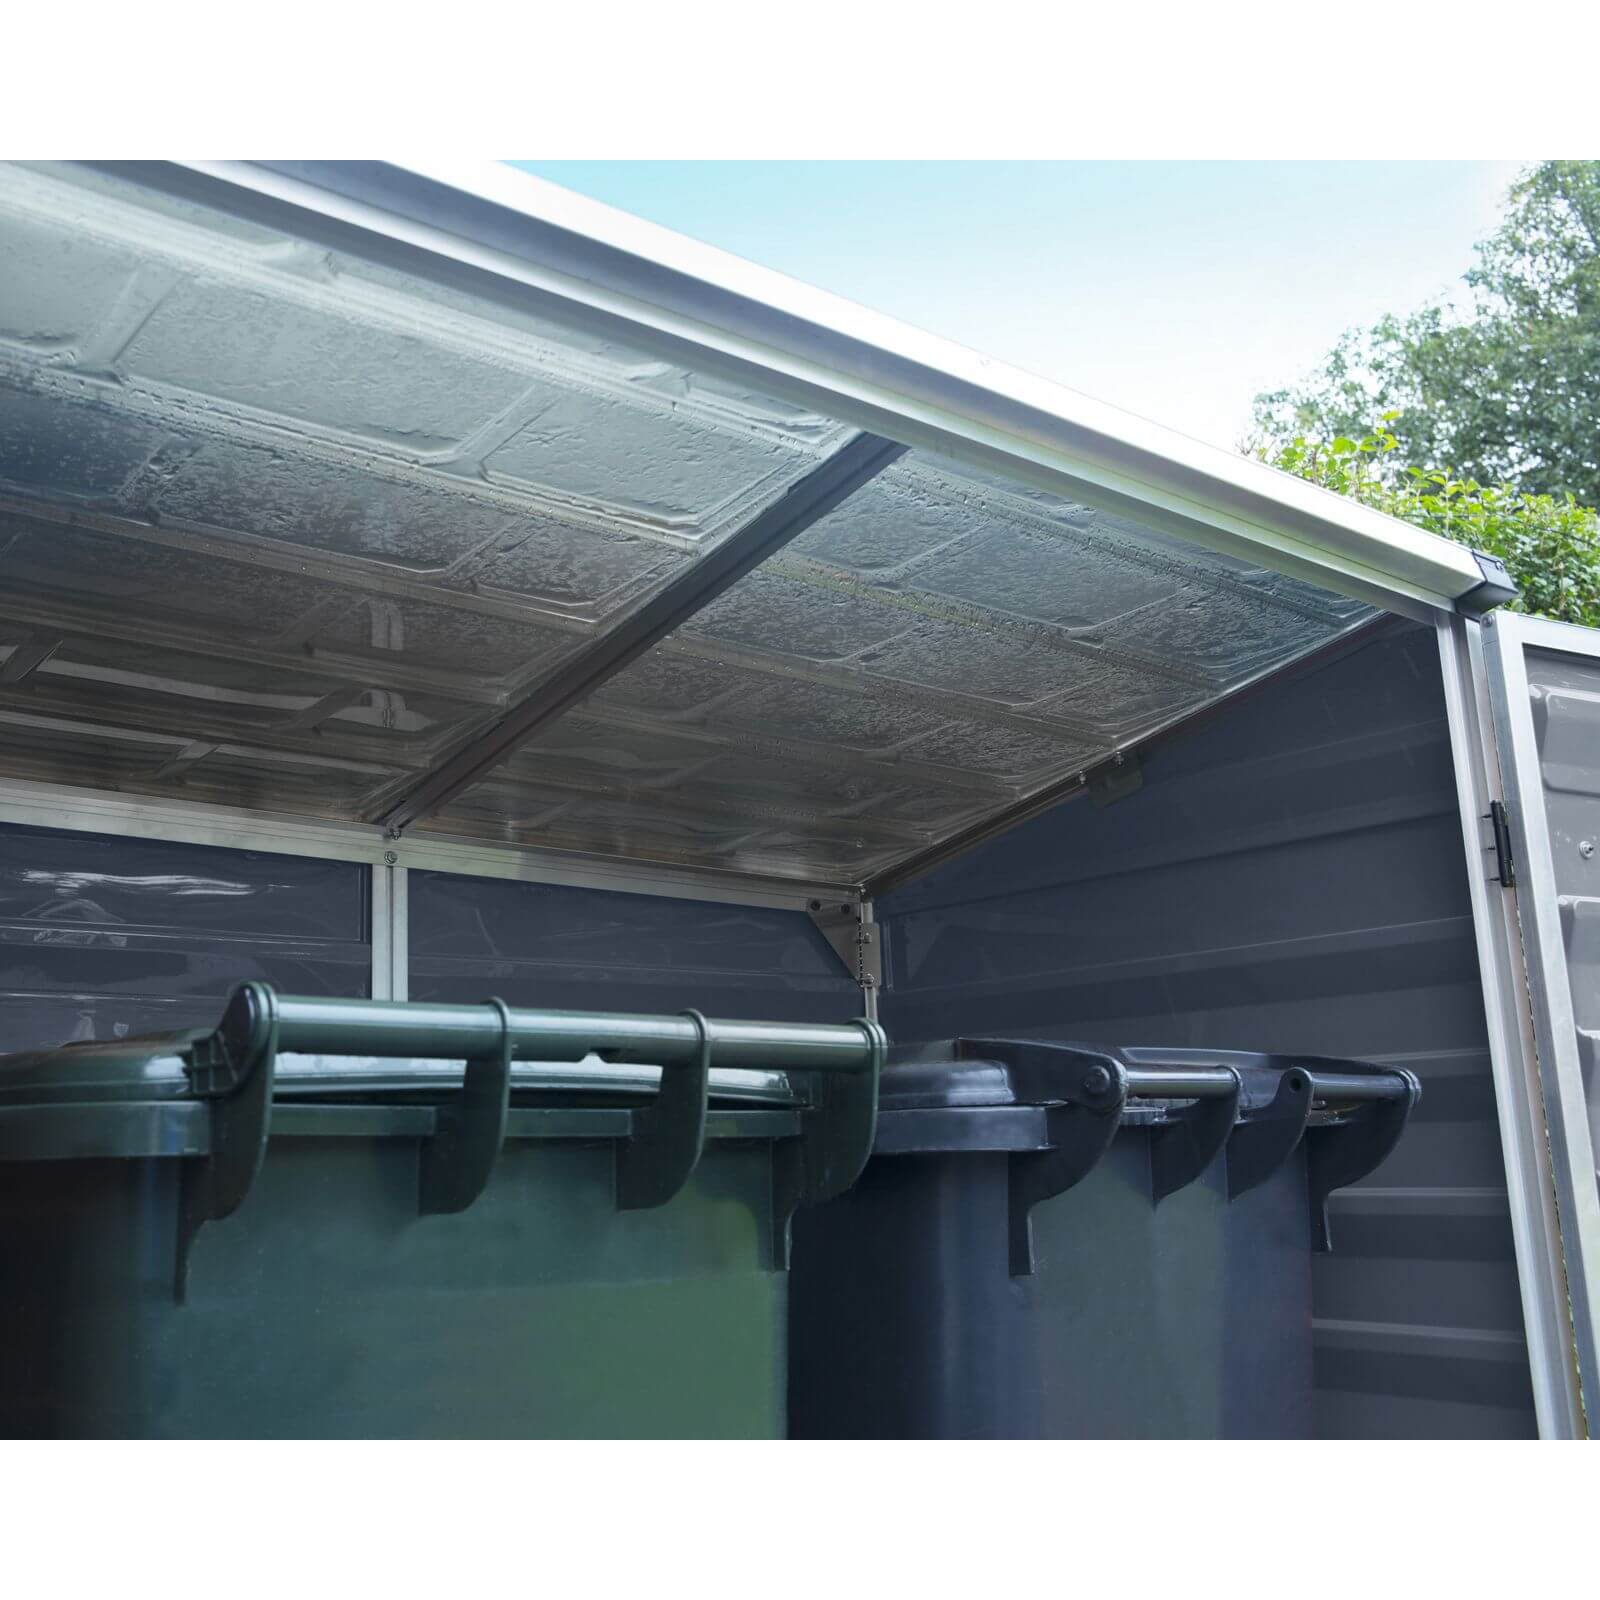 Palram - Canopia Voyager Pent Shed - Dark Grey